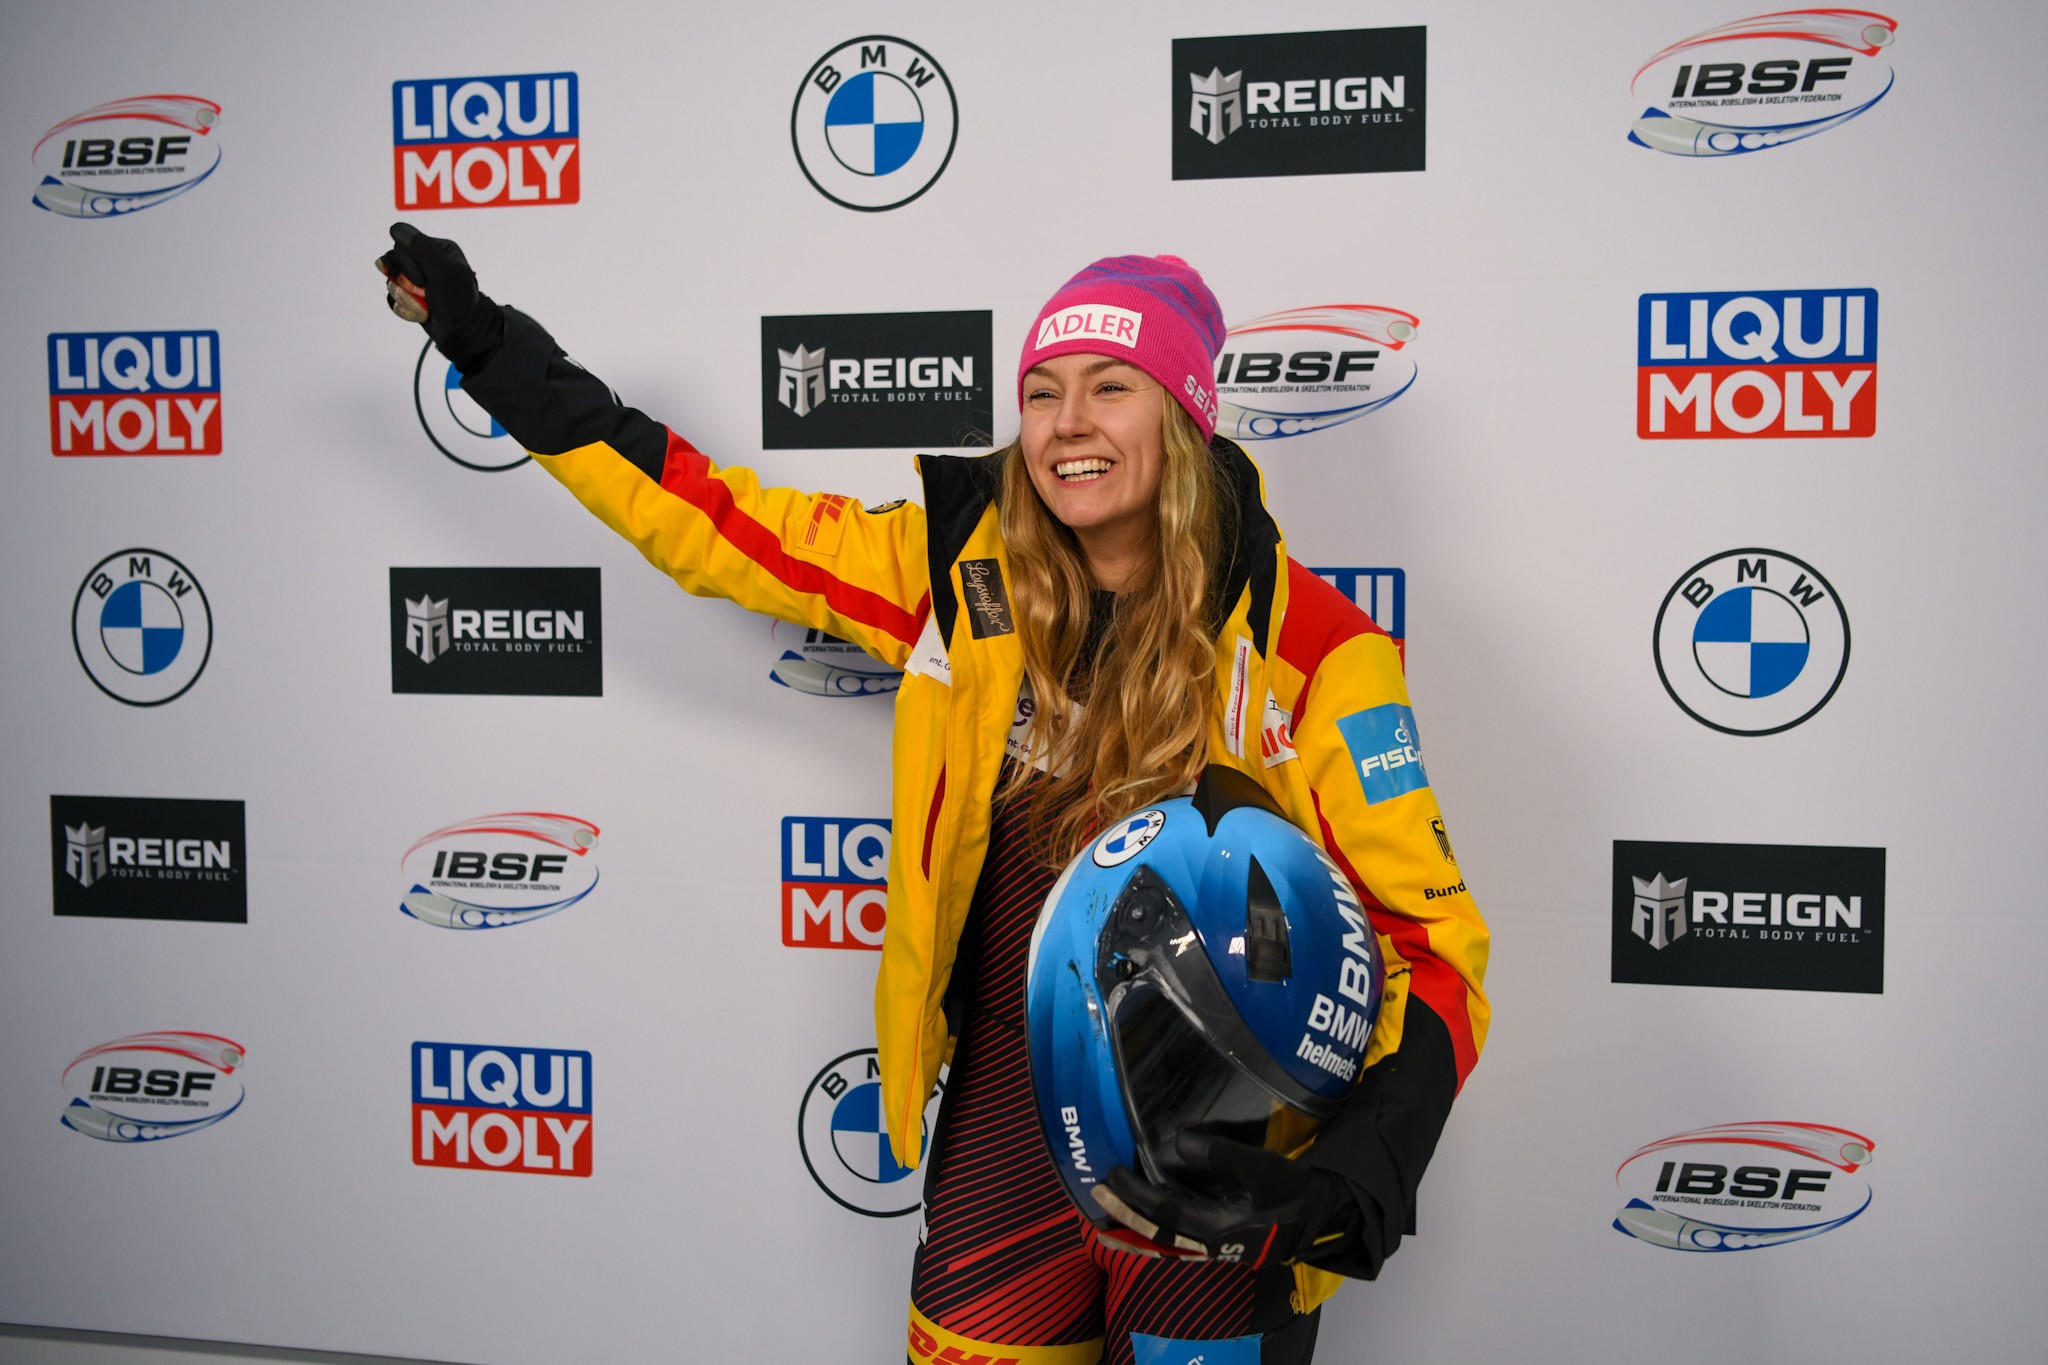 Laura Nolte of Germany won gold in women's monobob in Lake Placid ©IBSF 